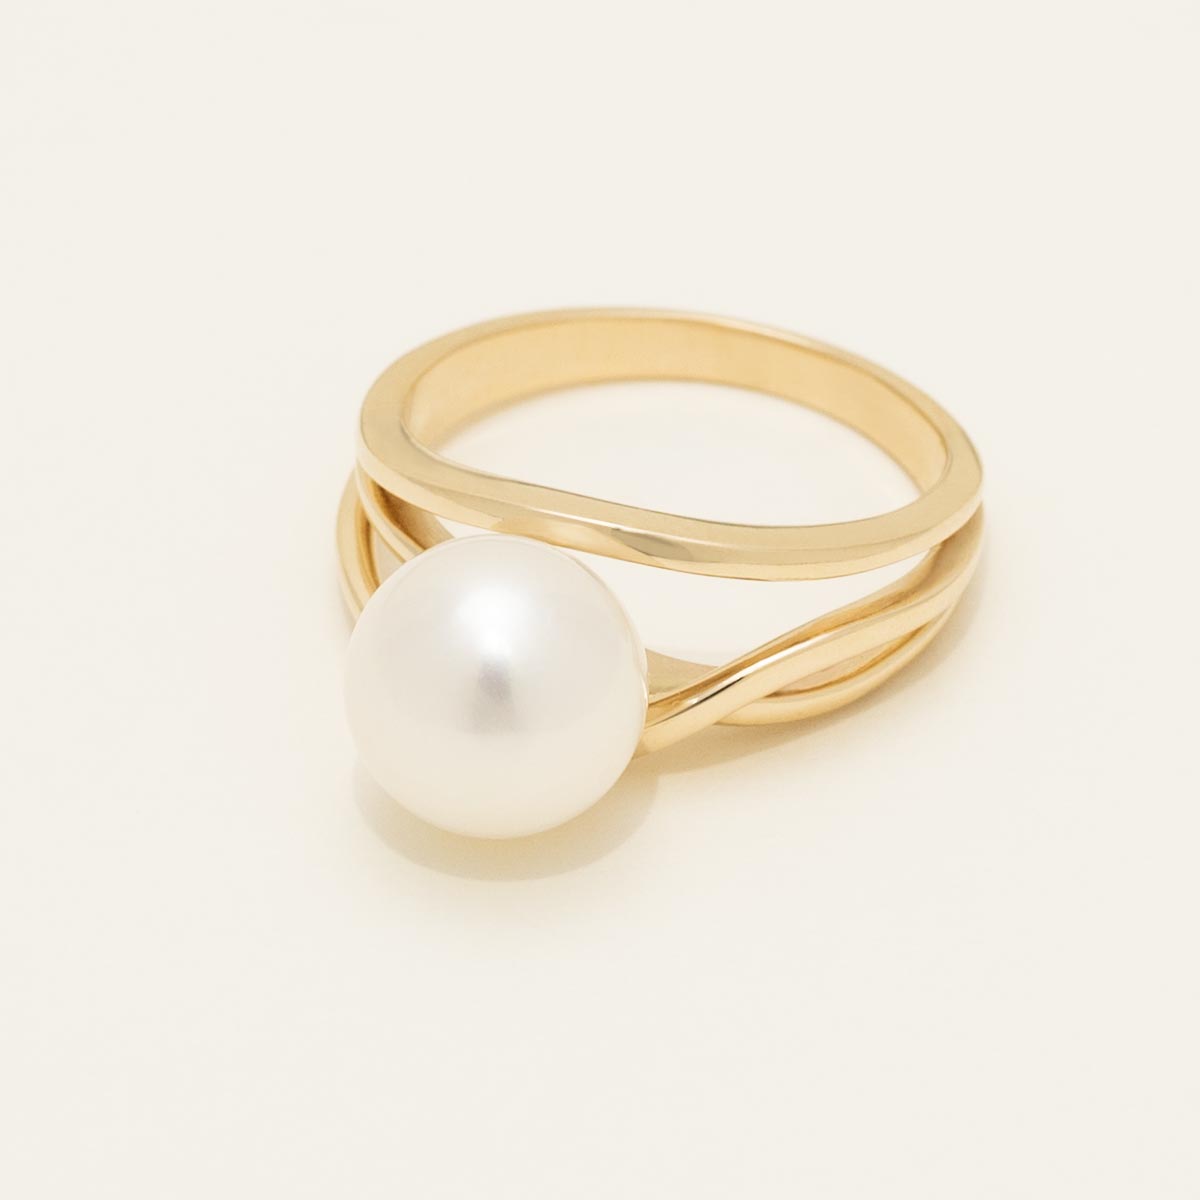 Cultured Freshwater Pearl Ring in 14kt Yellow Gold (9mm pearl)